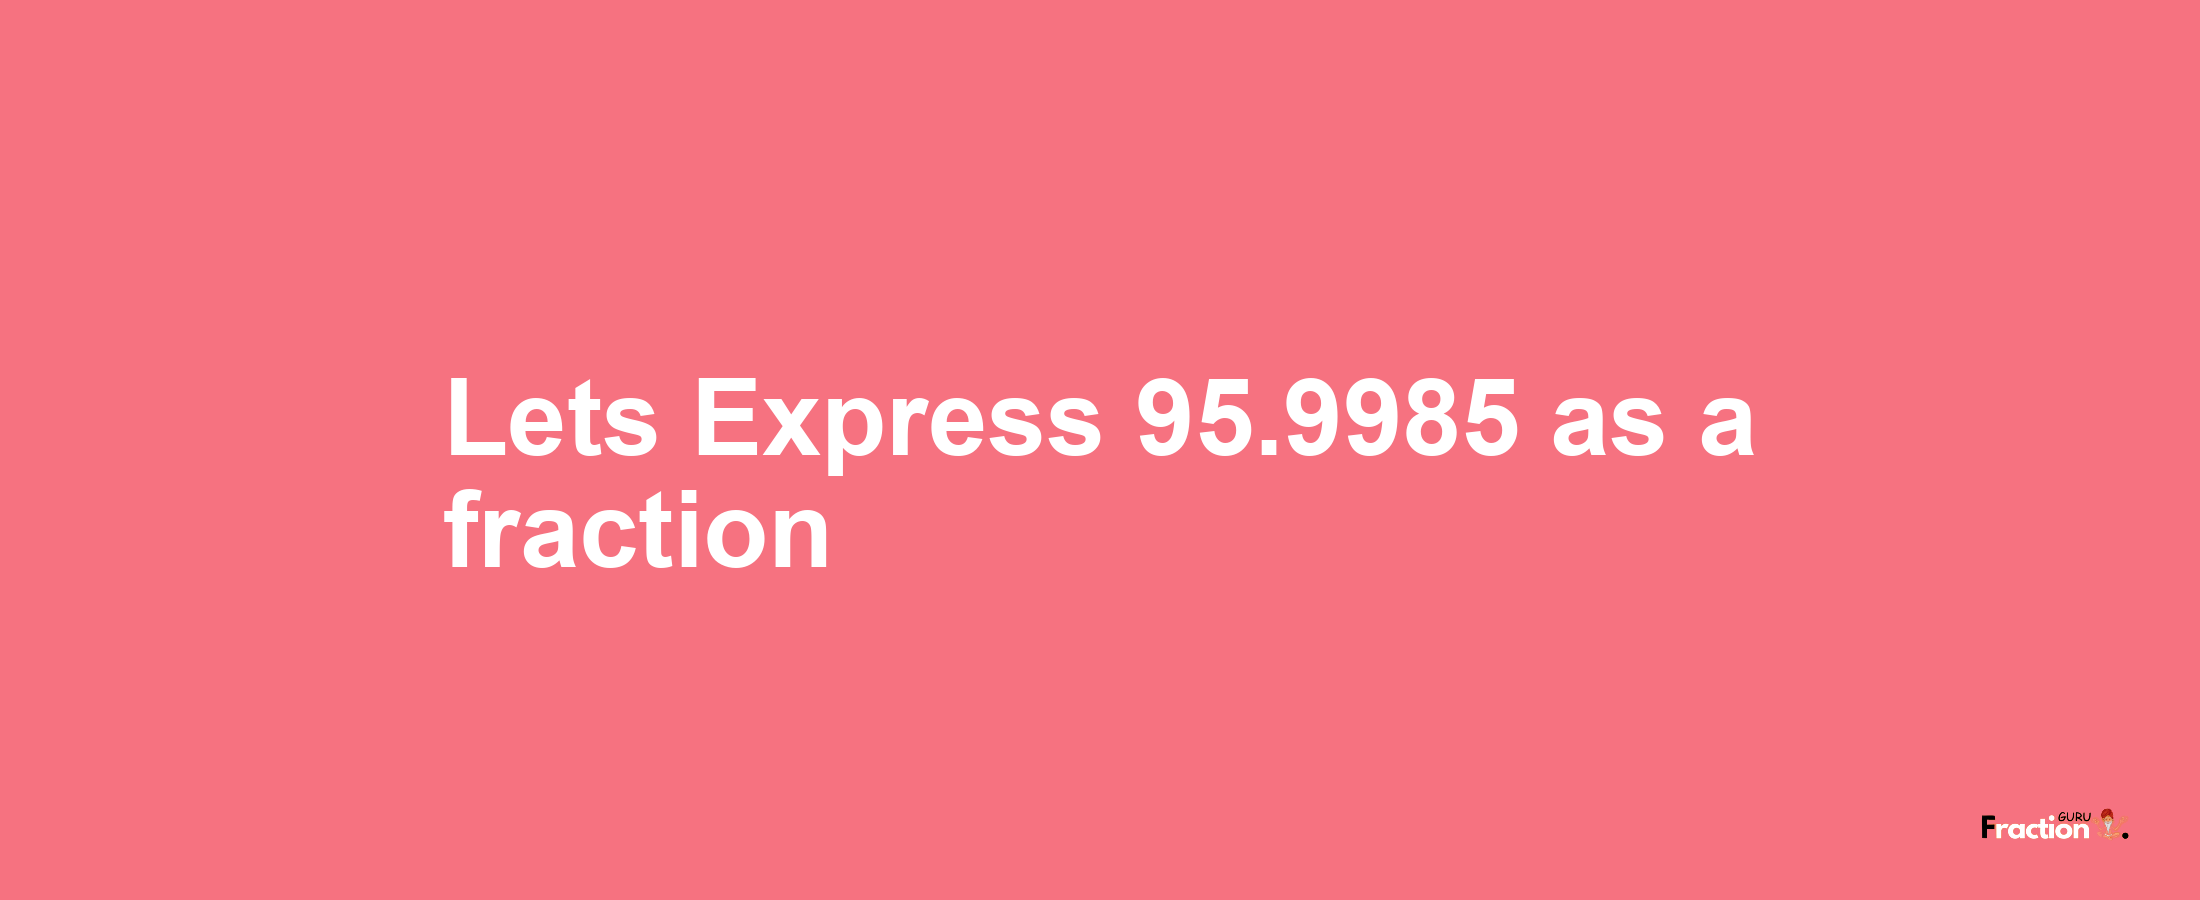 Lets Express 95.9985 as afraction